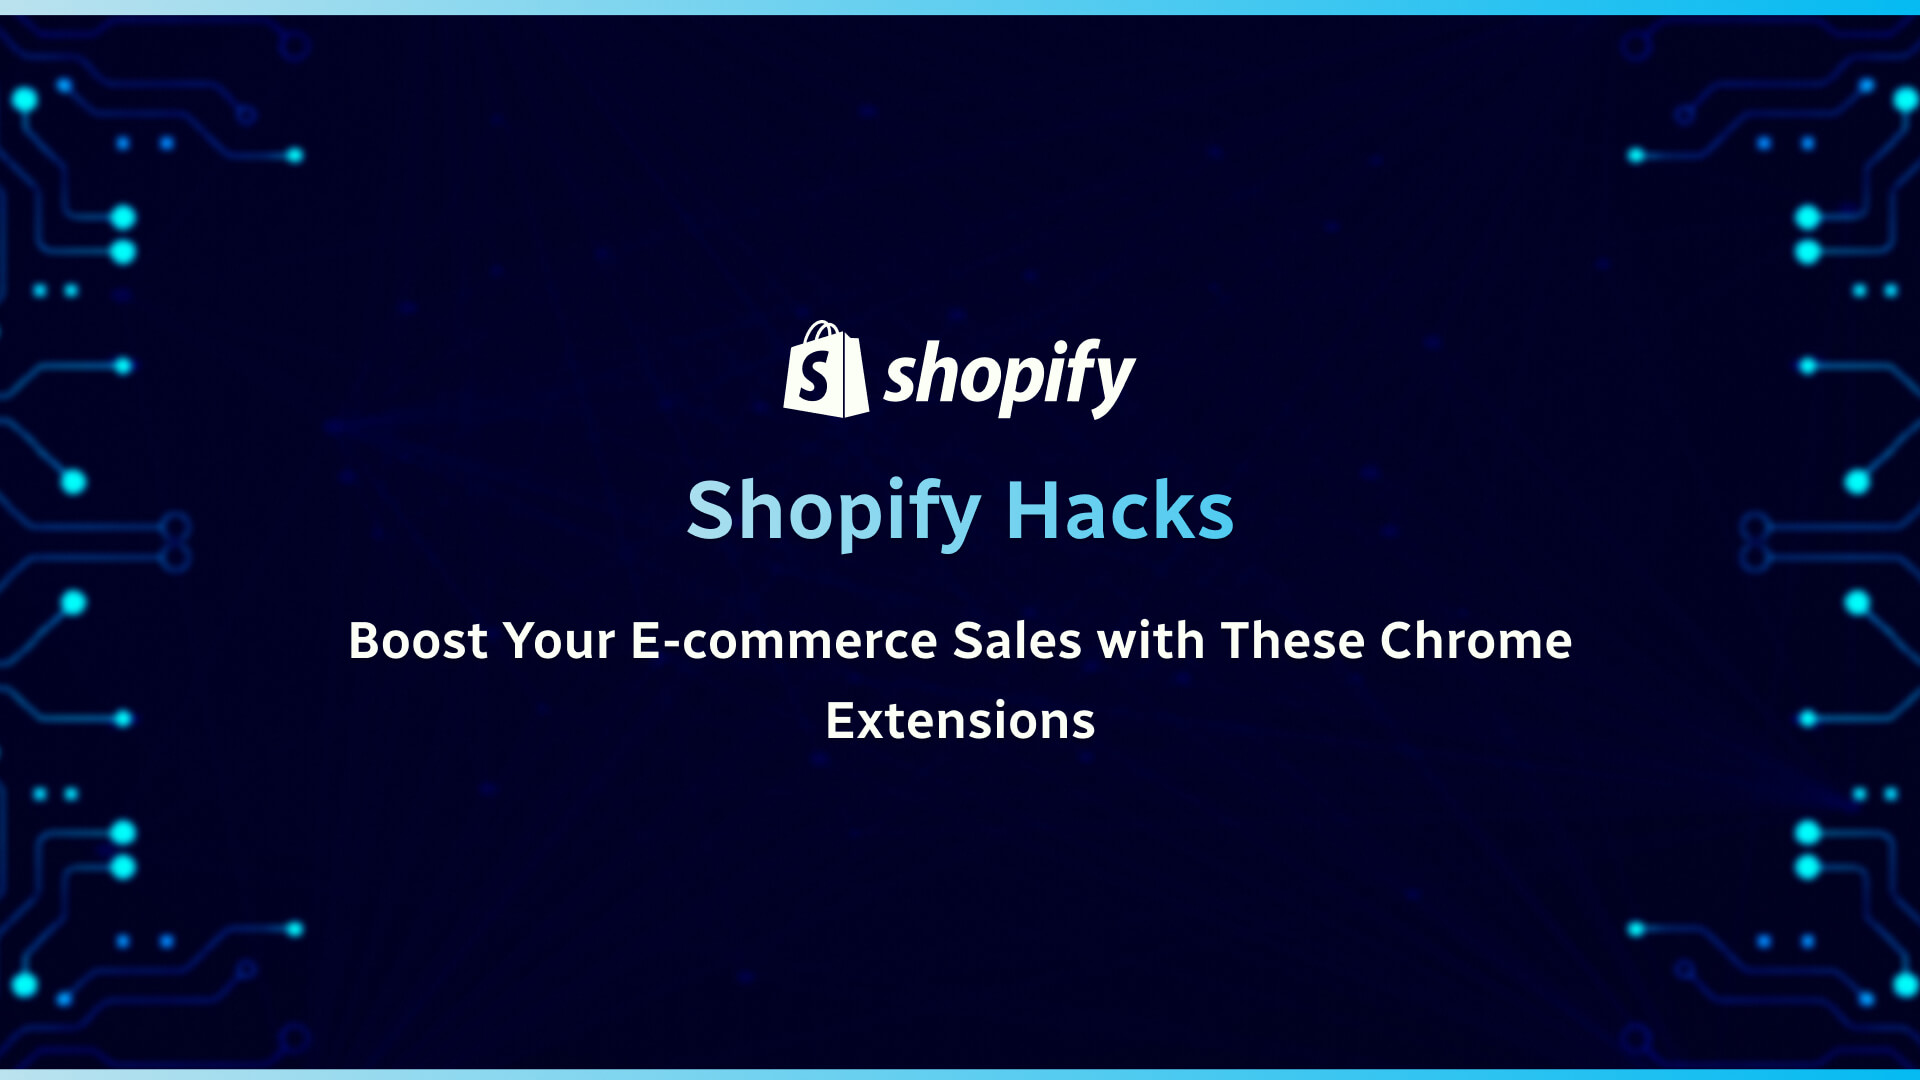 Shopify Hacks: Boost Your E-commerce Sales with These Chrome Extensions